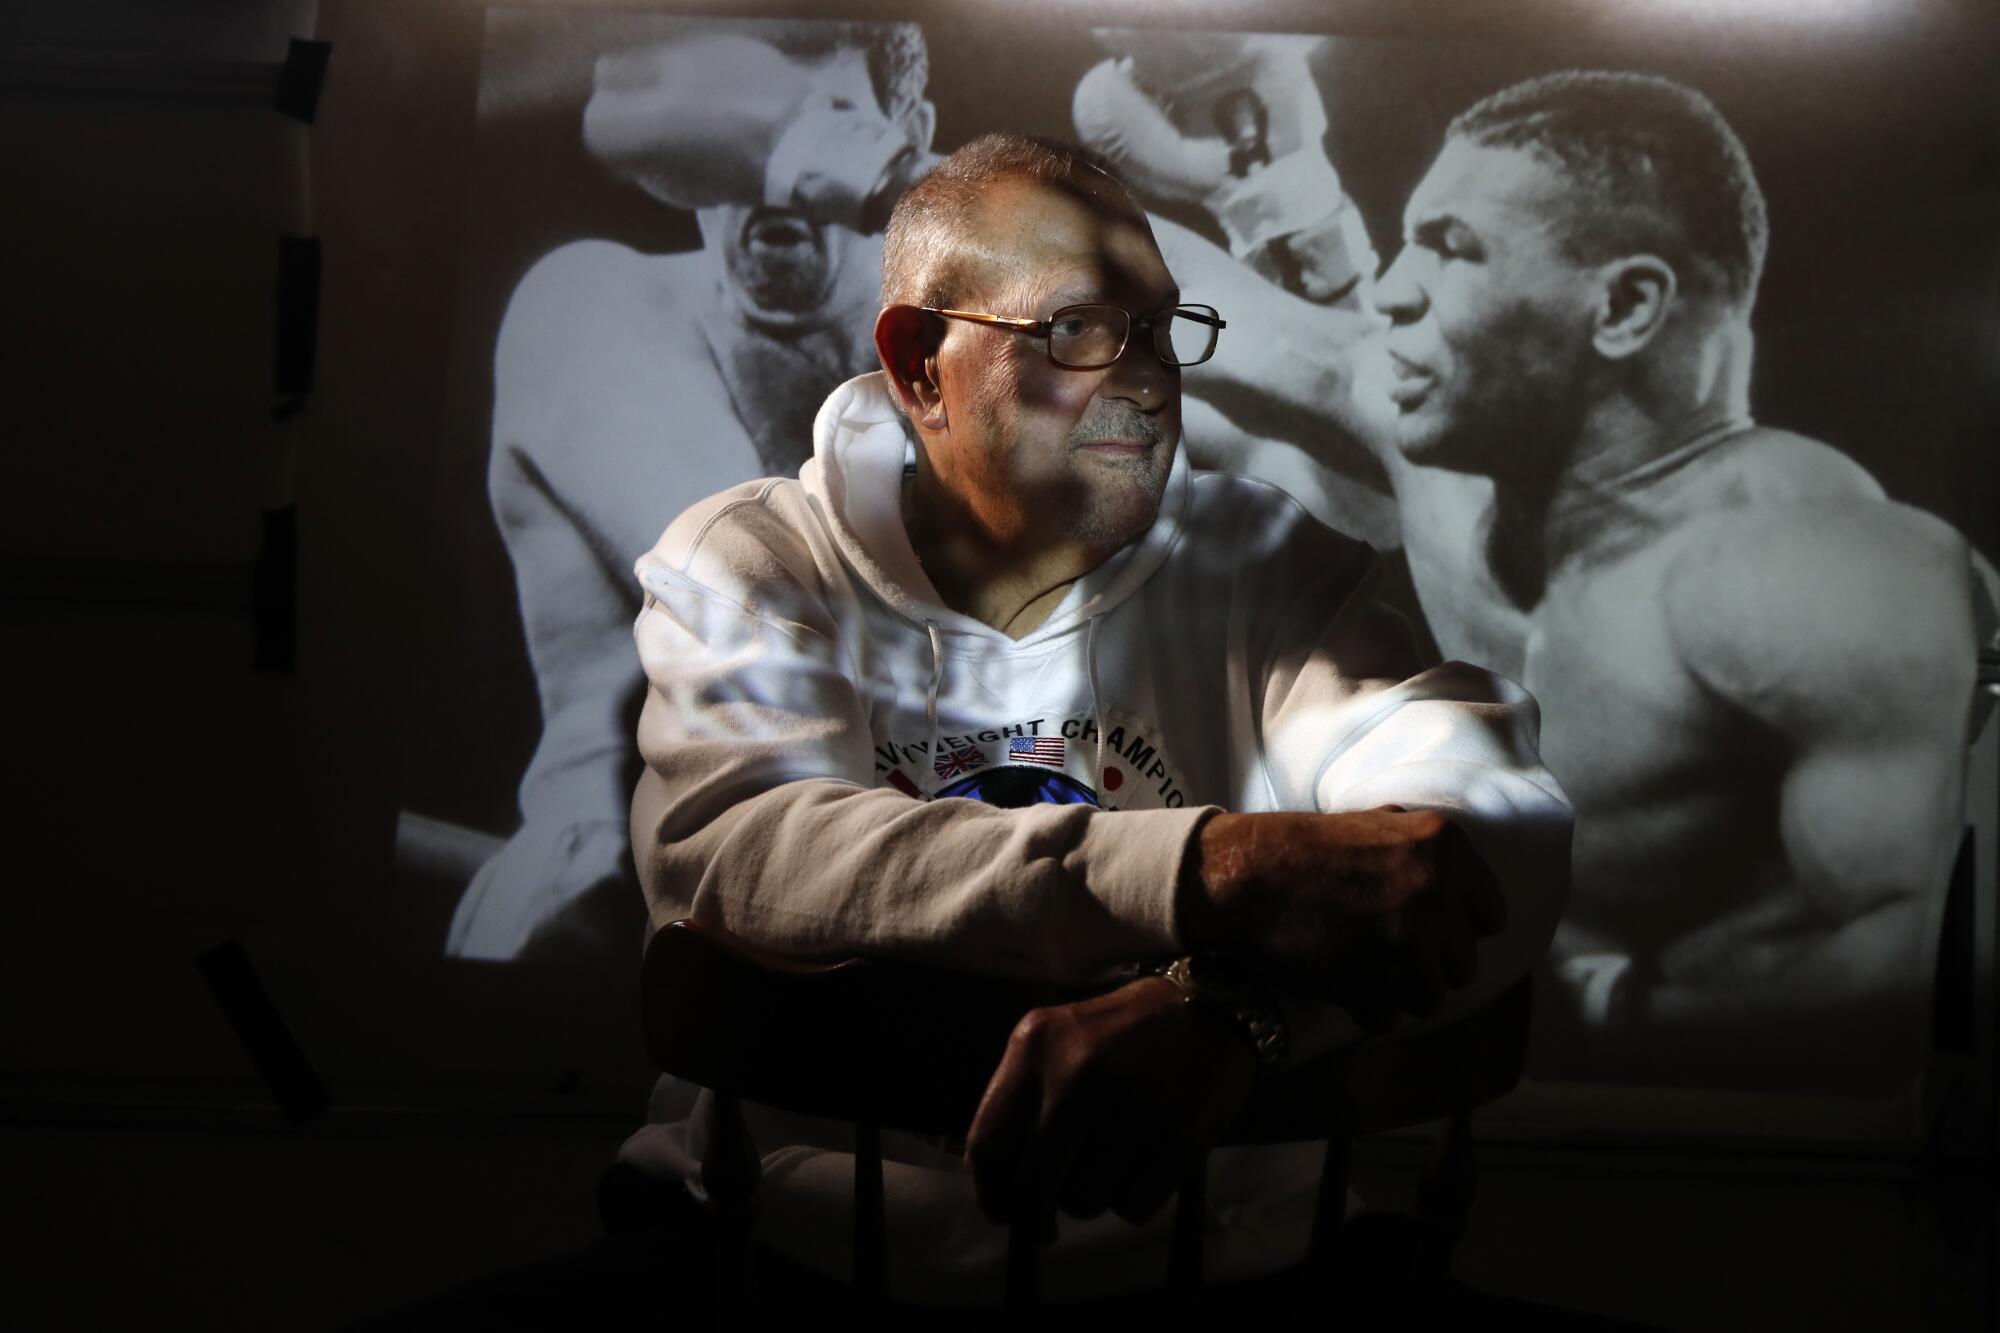 "Irish" Mike Jameson is shown in the shadows in front of a photo of two men boxing.